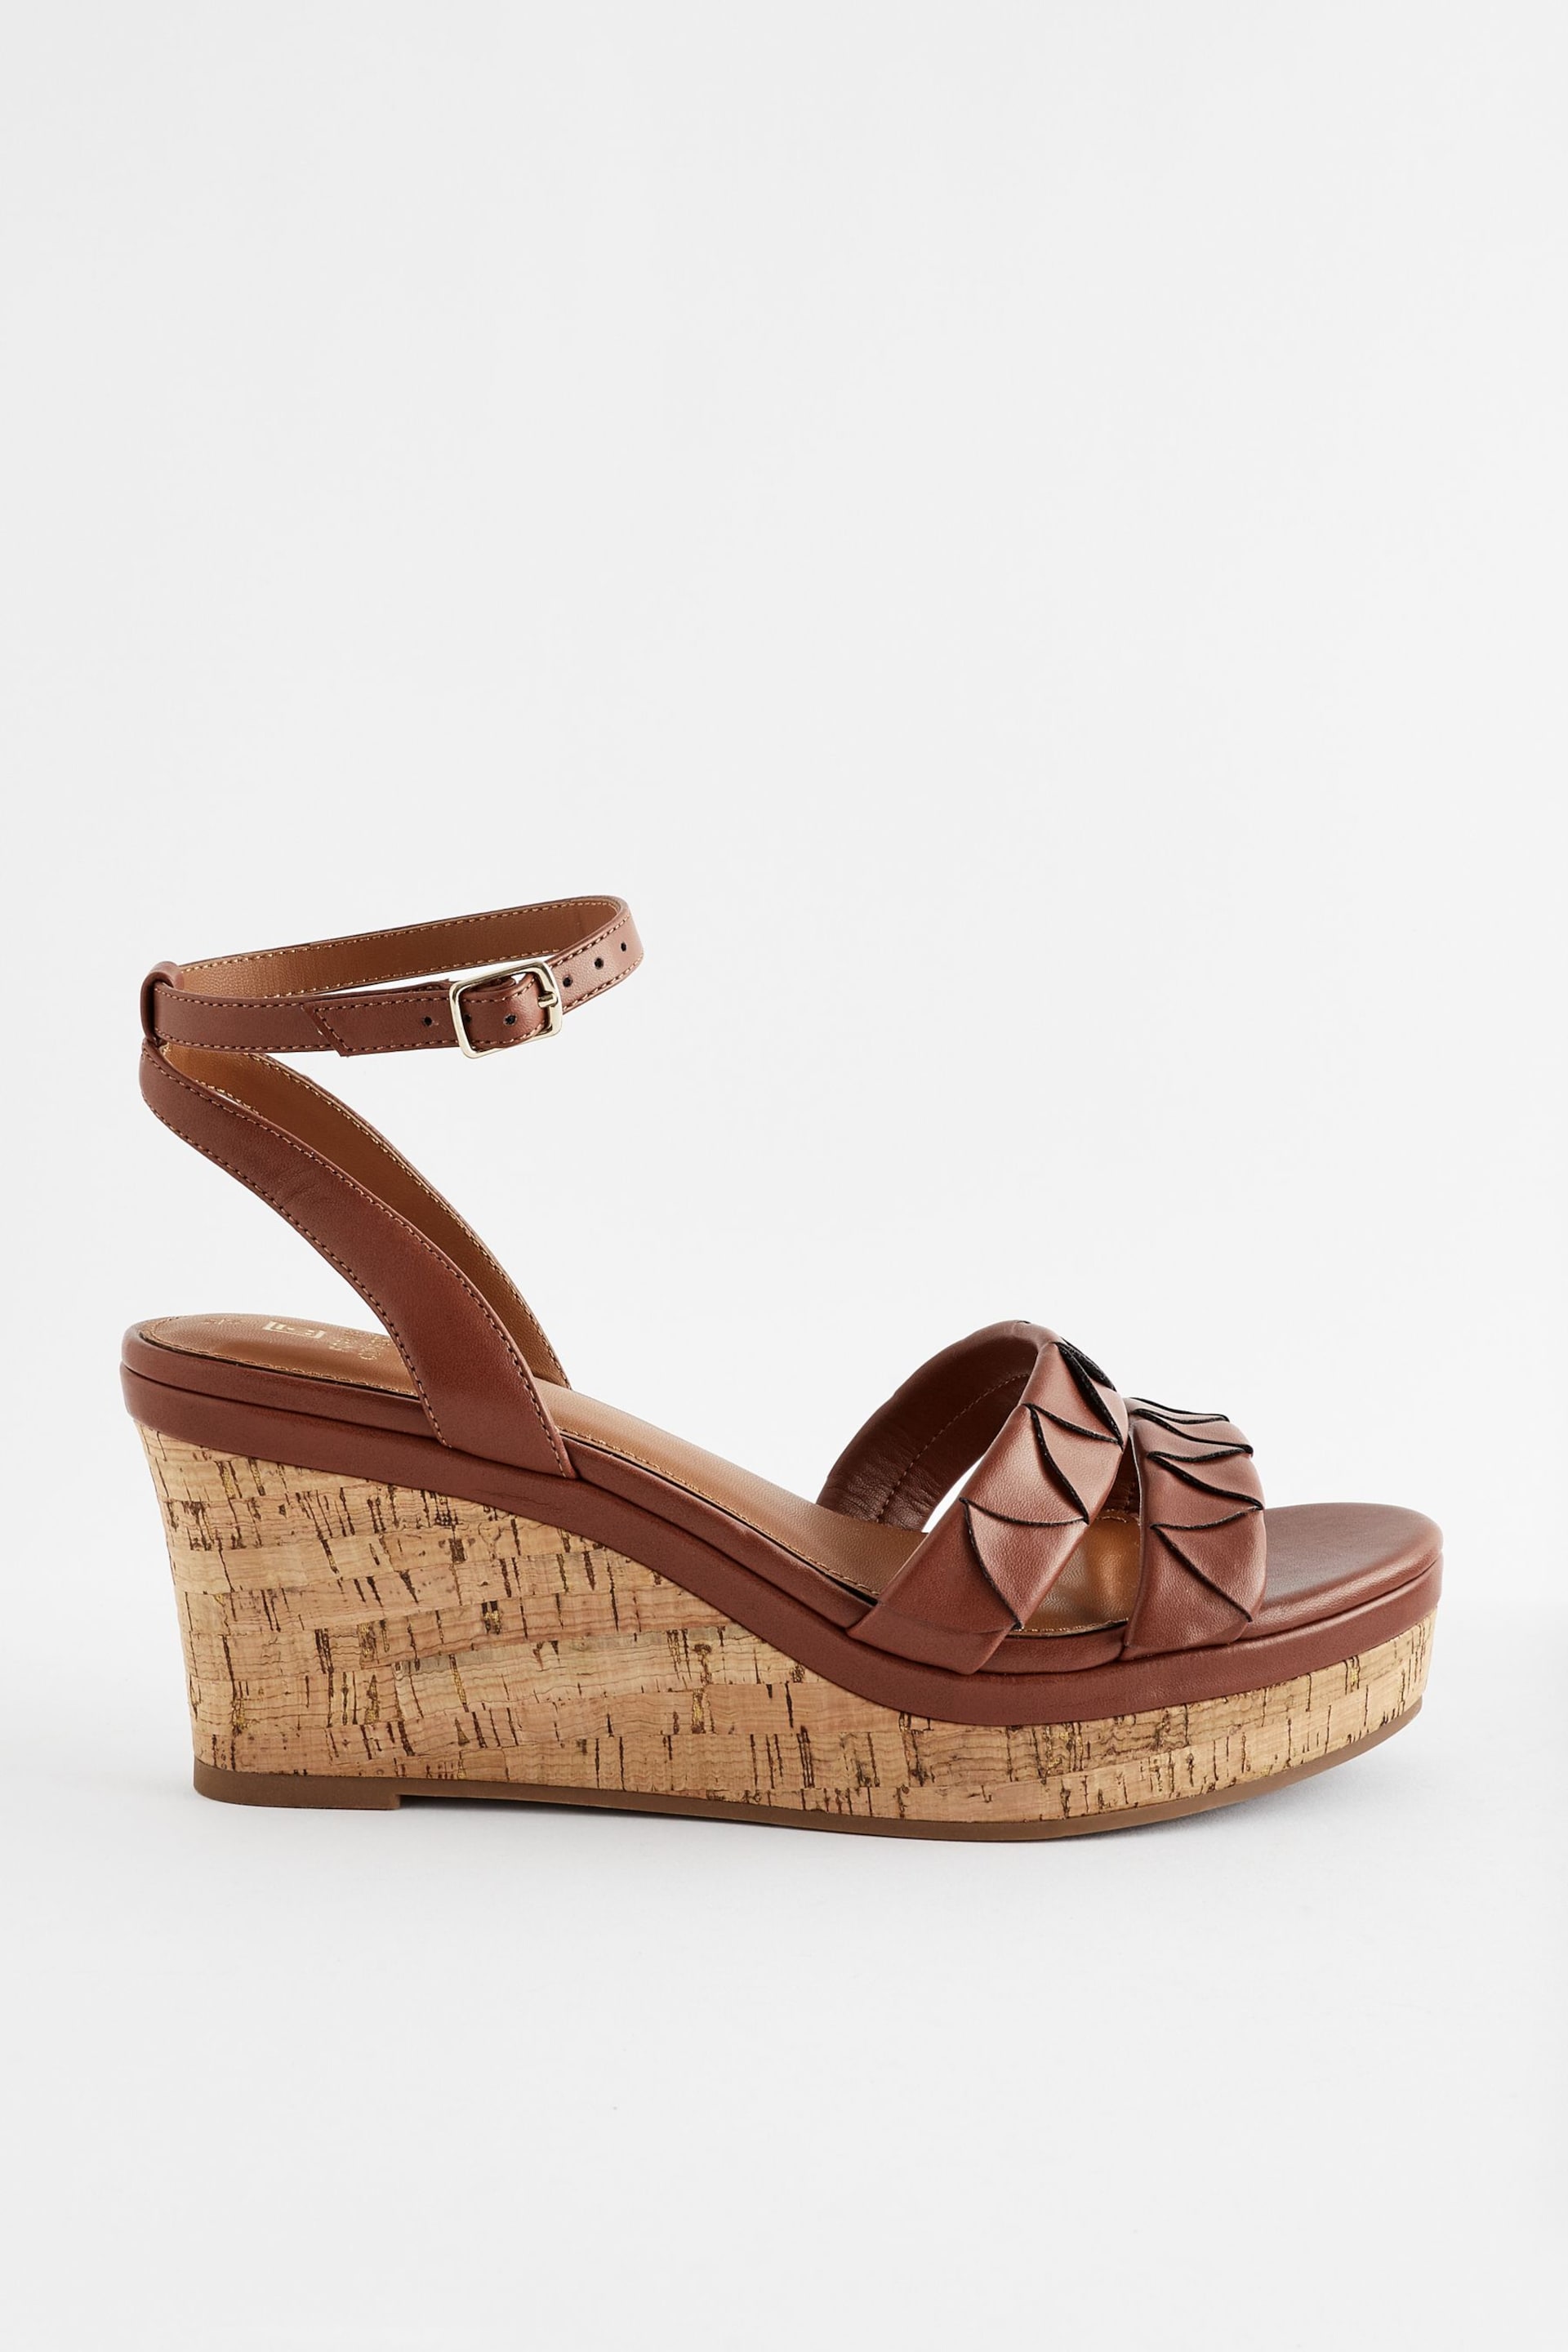 Tan Brown Regular/Wide Fit Forever Comfort® Double Strap Wedges - Image 4 of 9